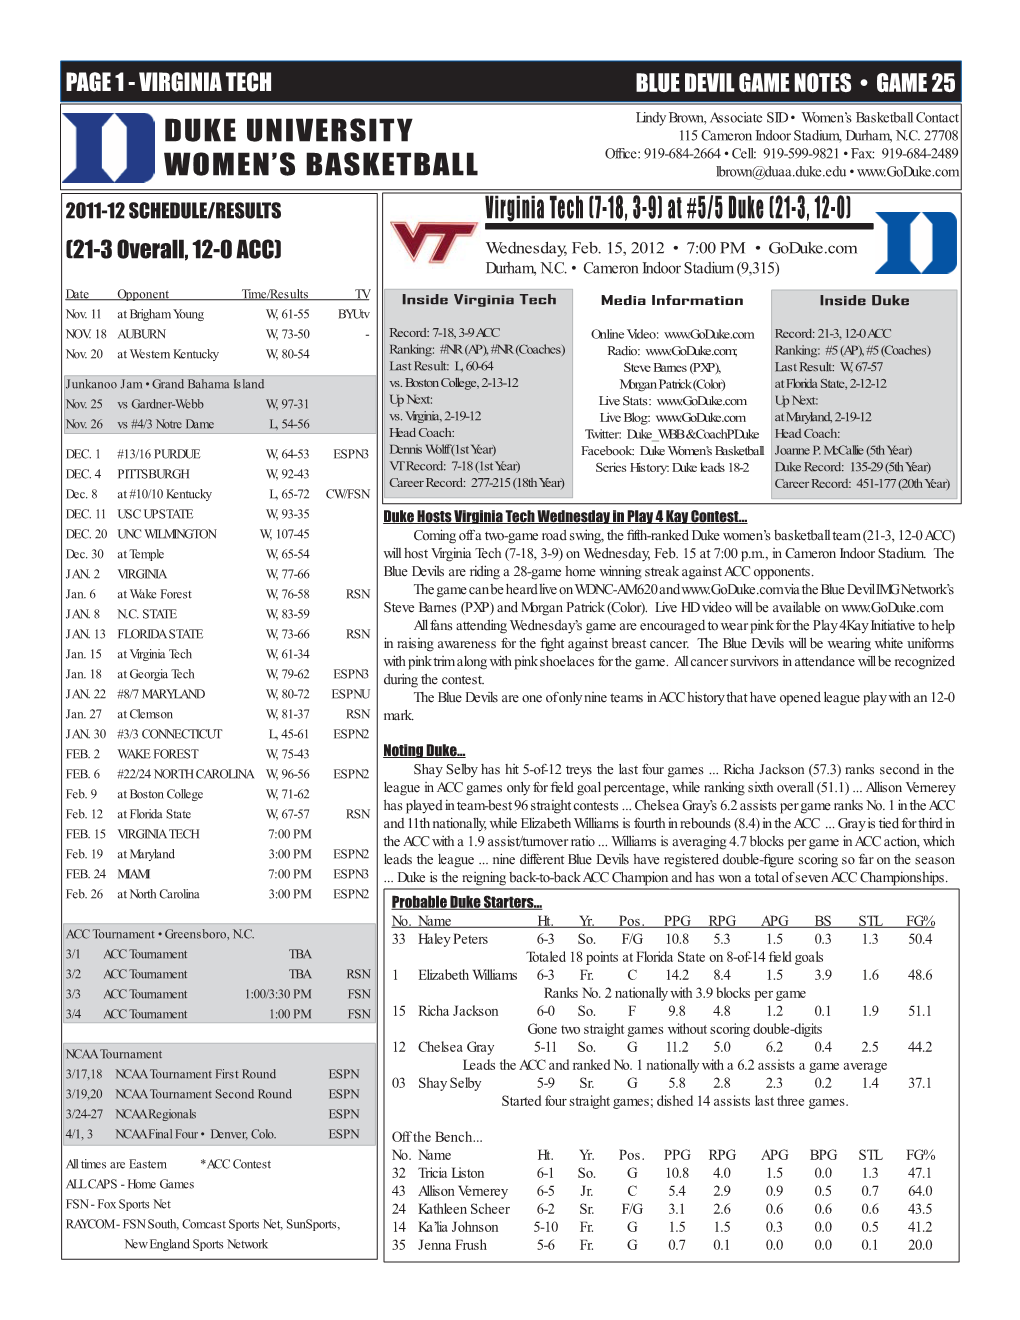 2011-12 WBB Game Notes